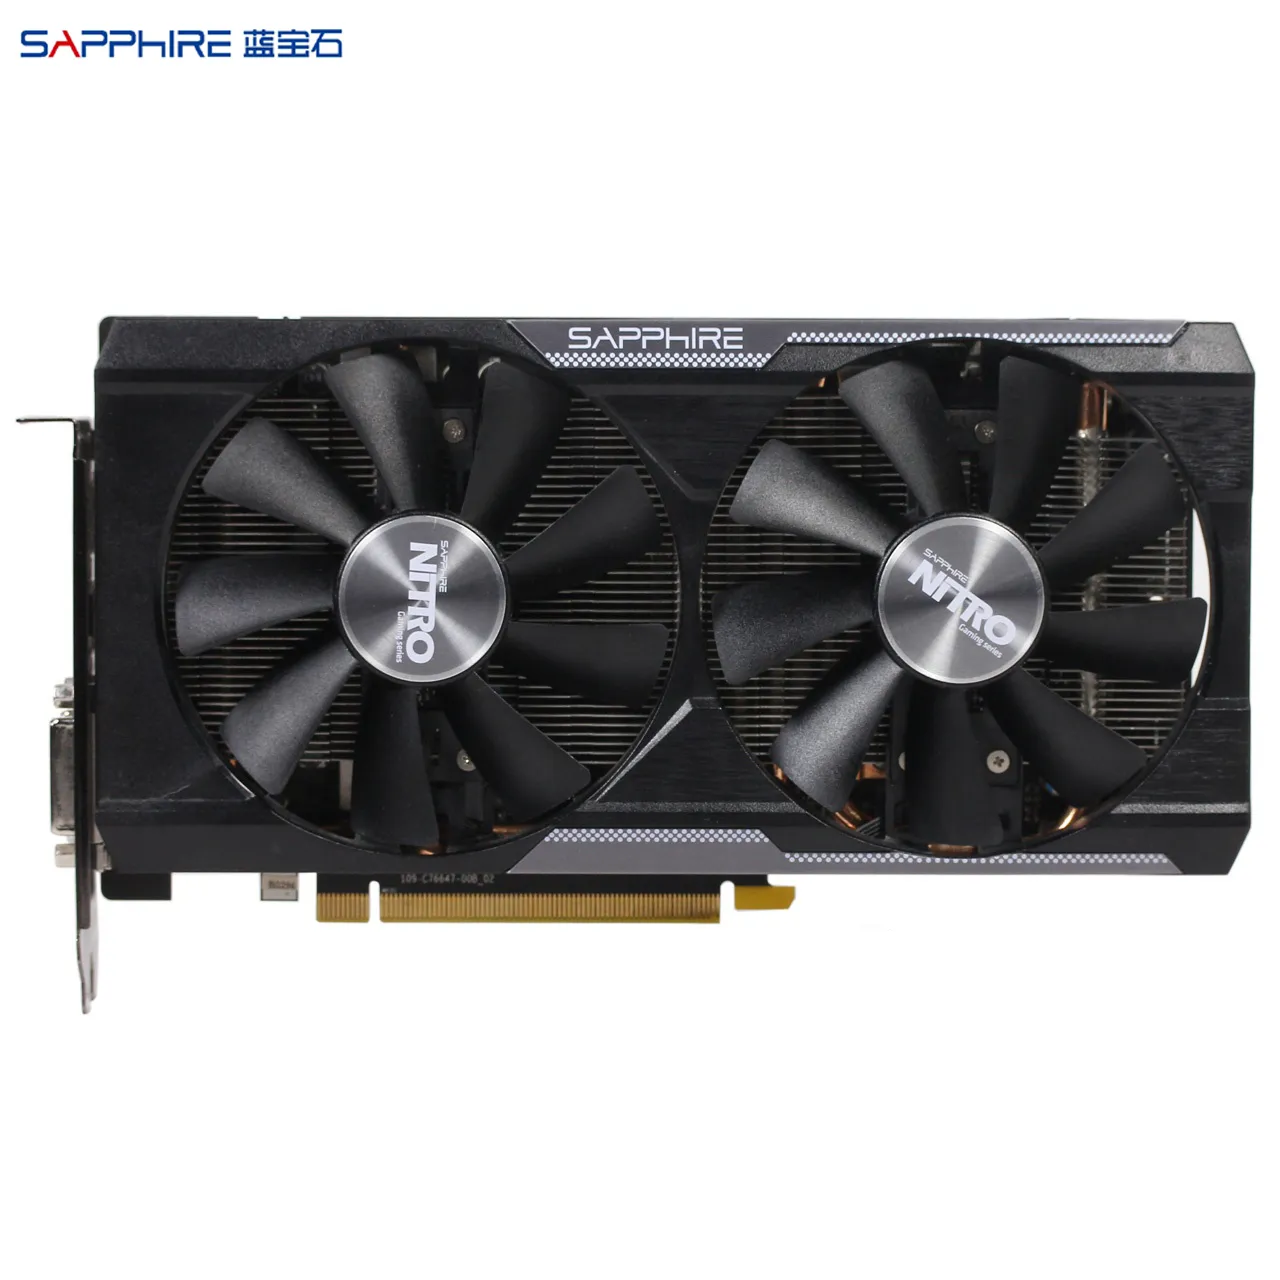 Sapphire Graphics Cards R9 380 4g Nitro 256bit Gddr5 Video Card For Amd R9  300 Cards 4gb R 9 380 4g Displayport Hdmi Dvi Used - Graphics Cards -  AliExpress